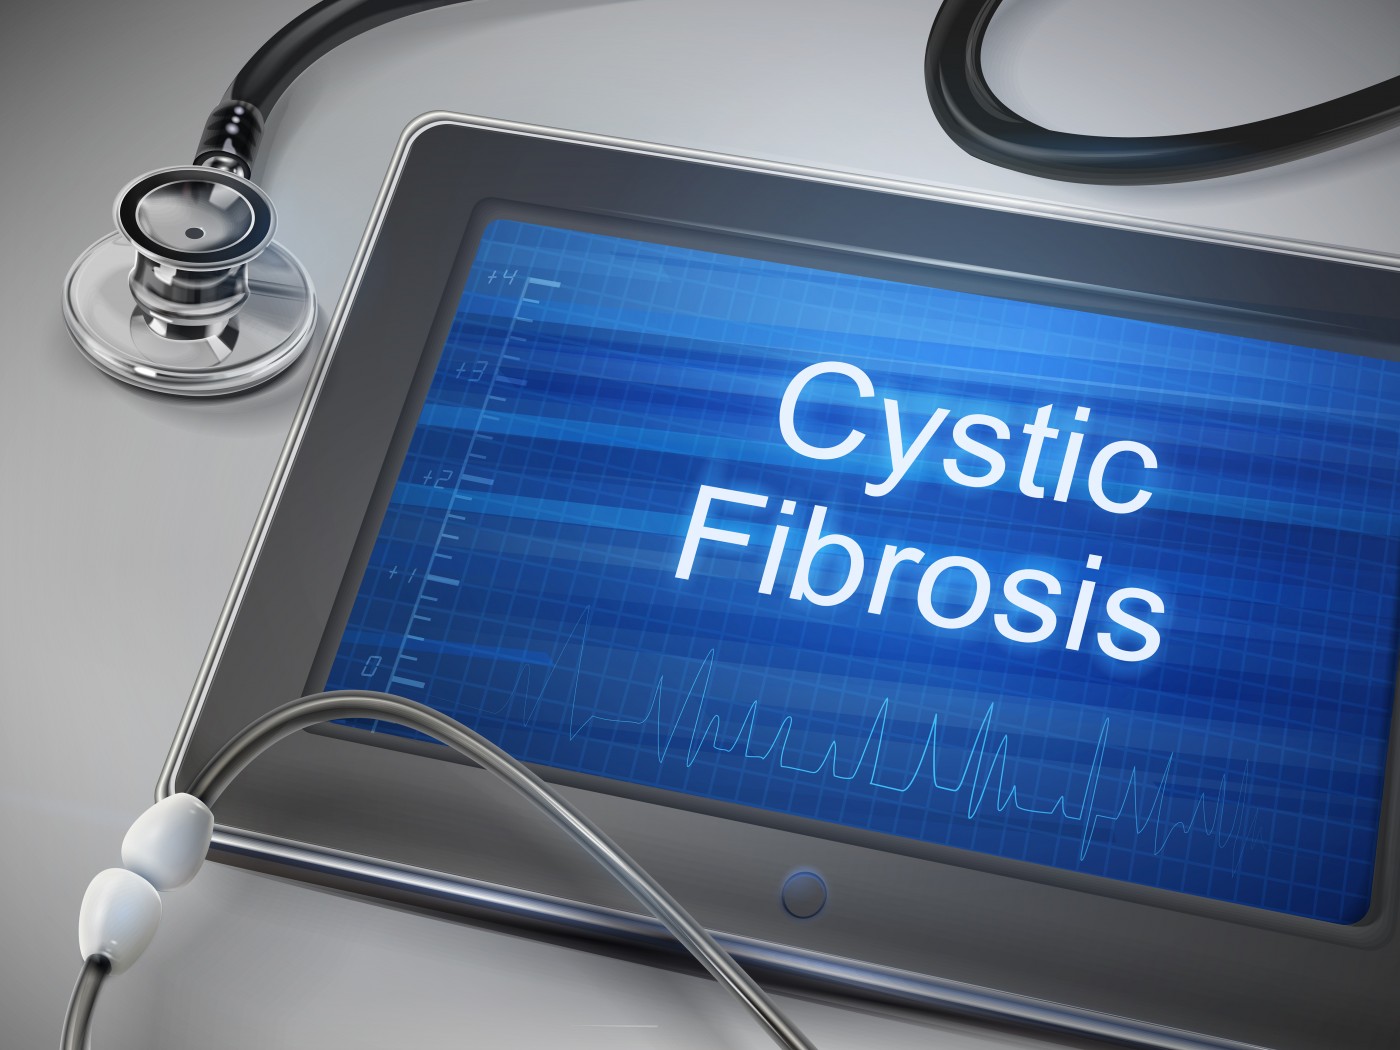 P. aeruginosa lung infection in cystic fibrosis